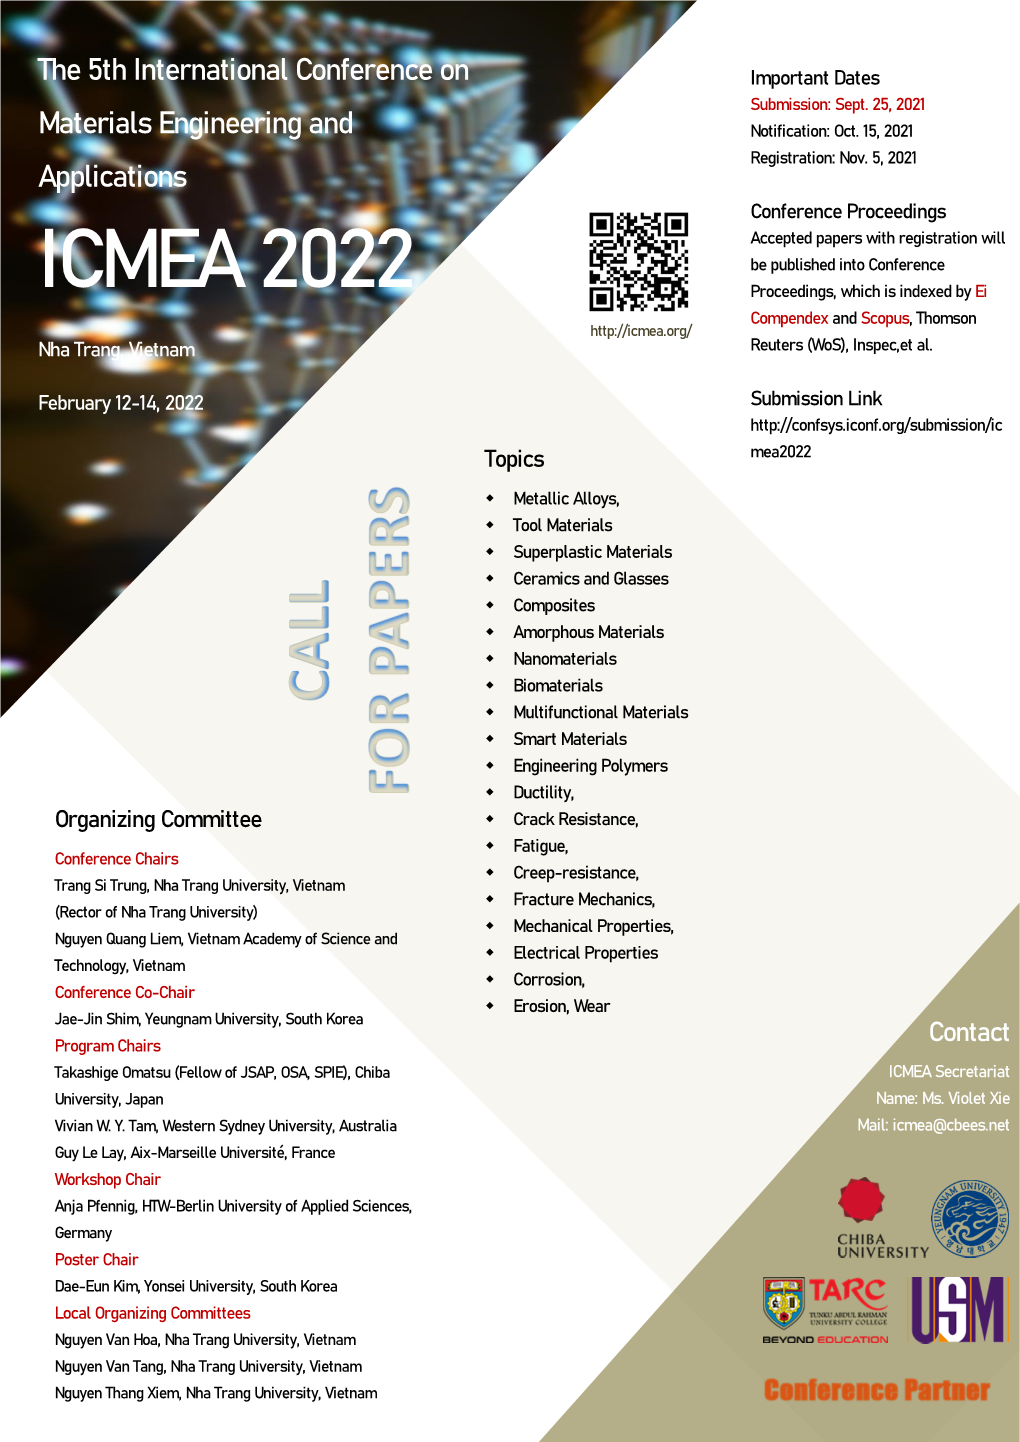 ICMEA 2022 Proceedings, Which Is Indexed by Ei Compendex and Scopus, Thomson Nha Trang, Vietnam Reuters (Wos), Inspec,Et Al